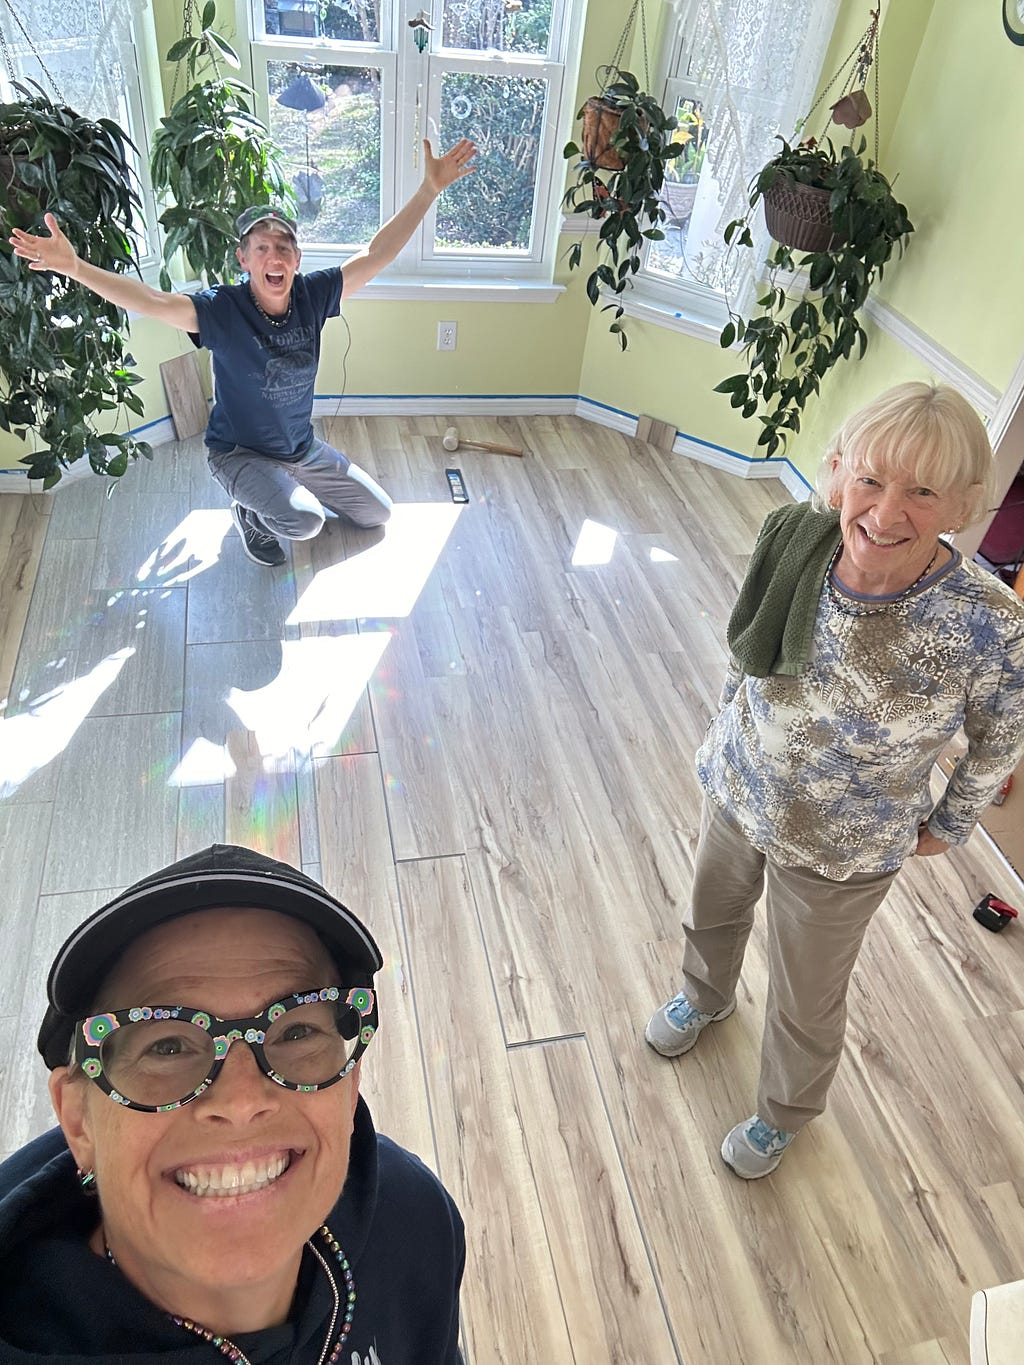 CC, Doc and CC’s Mom working on the new kitchen flooring at Mom’s house! Doc loves to show women that DIY is possible and even fun!